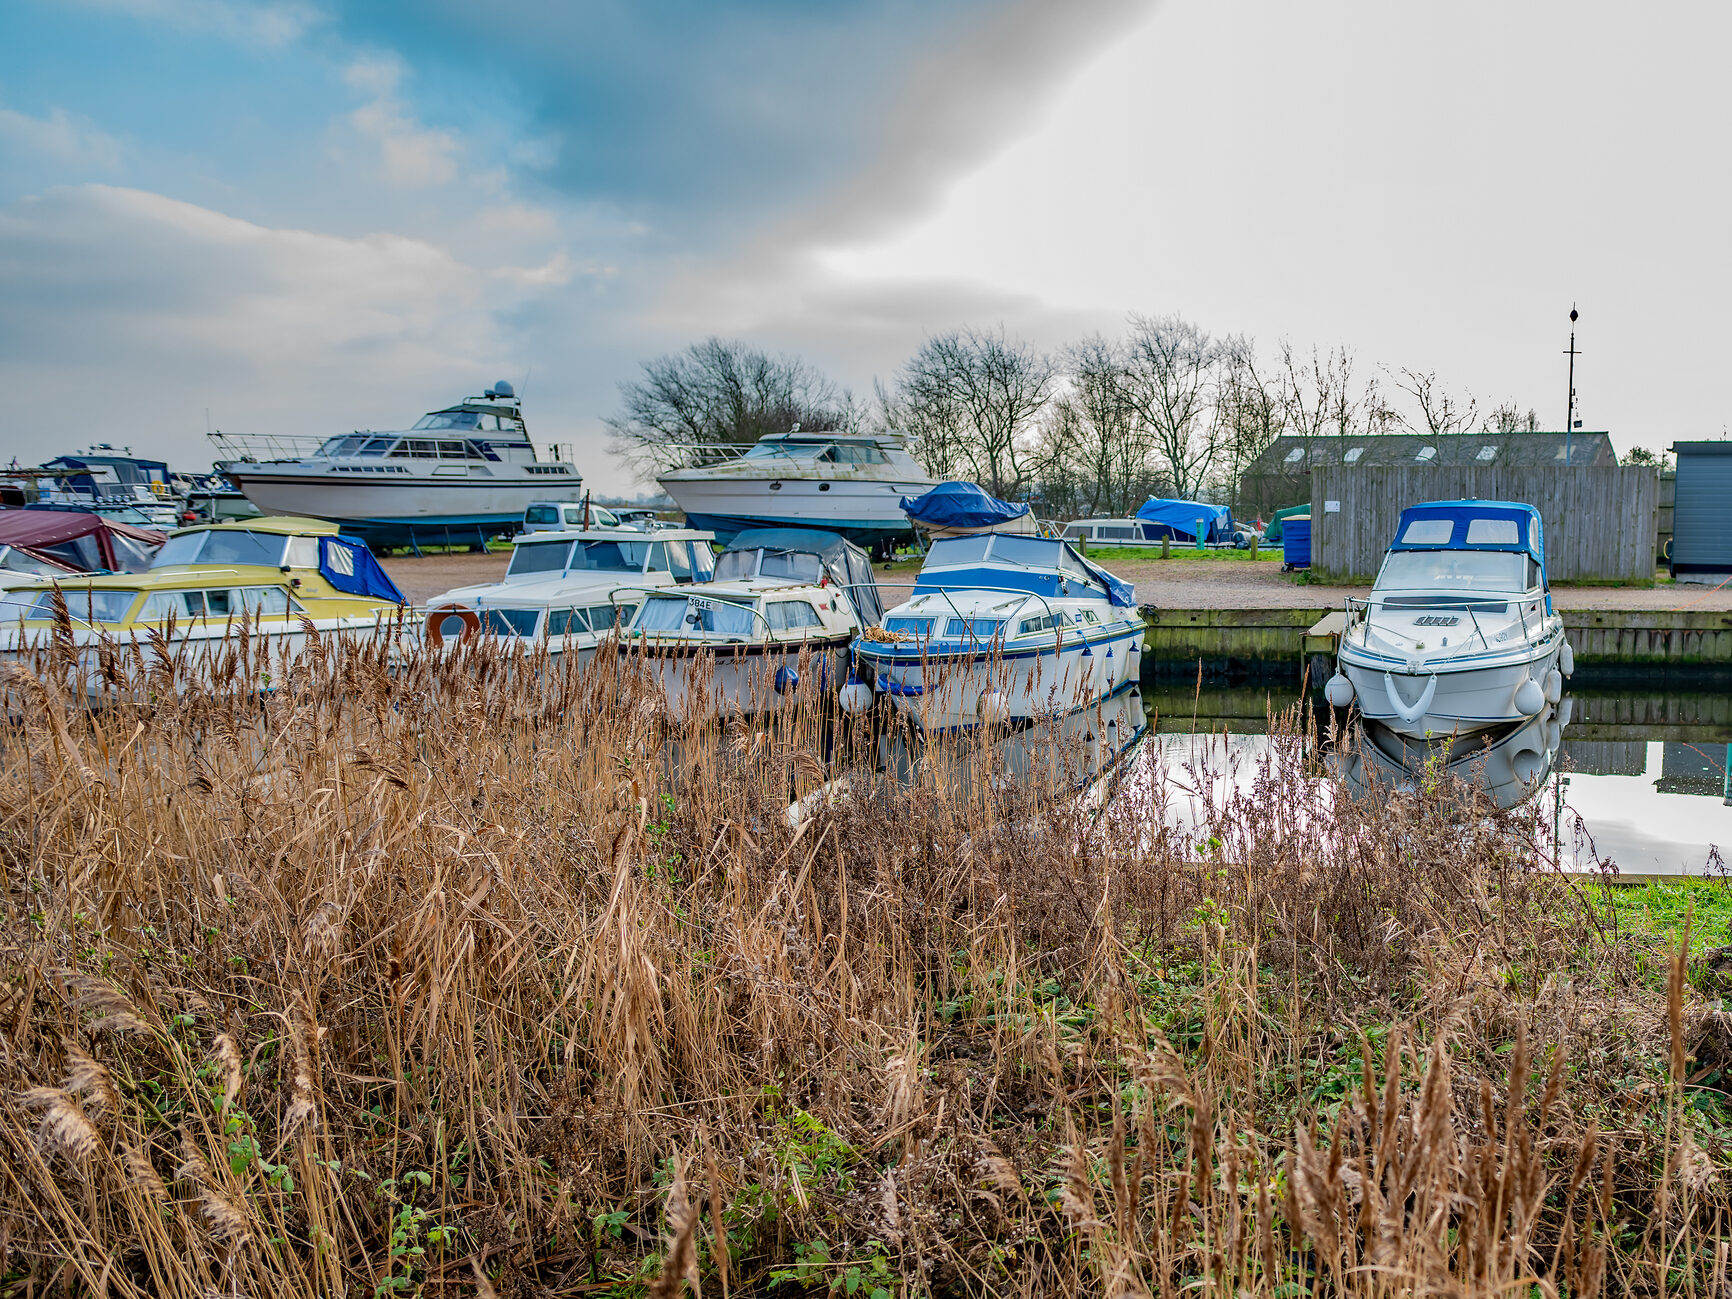 Mooring whilst Visiting Acle